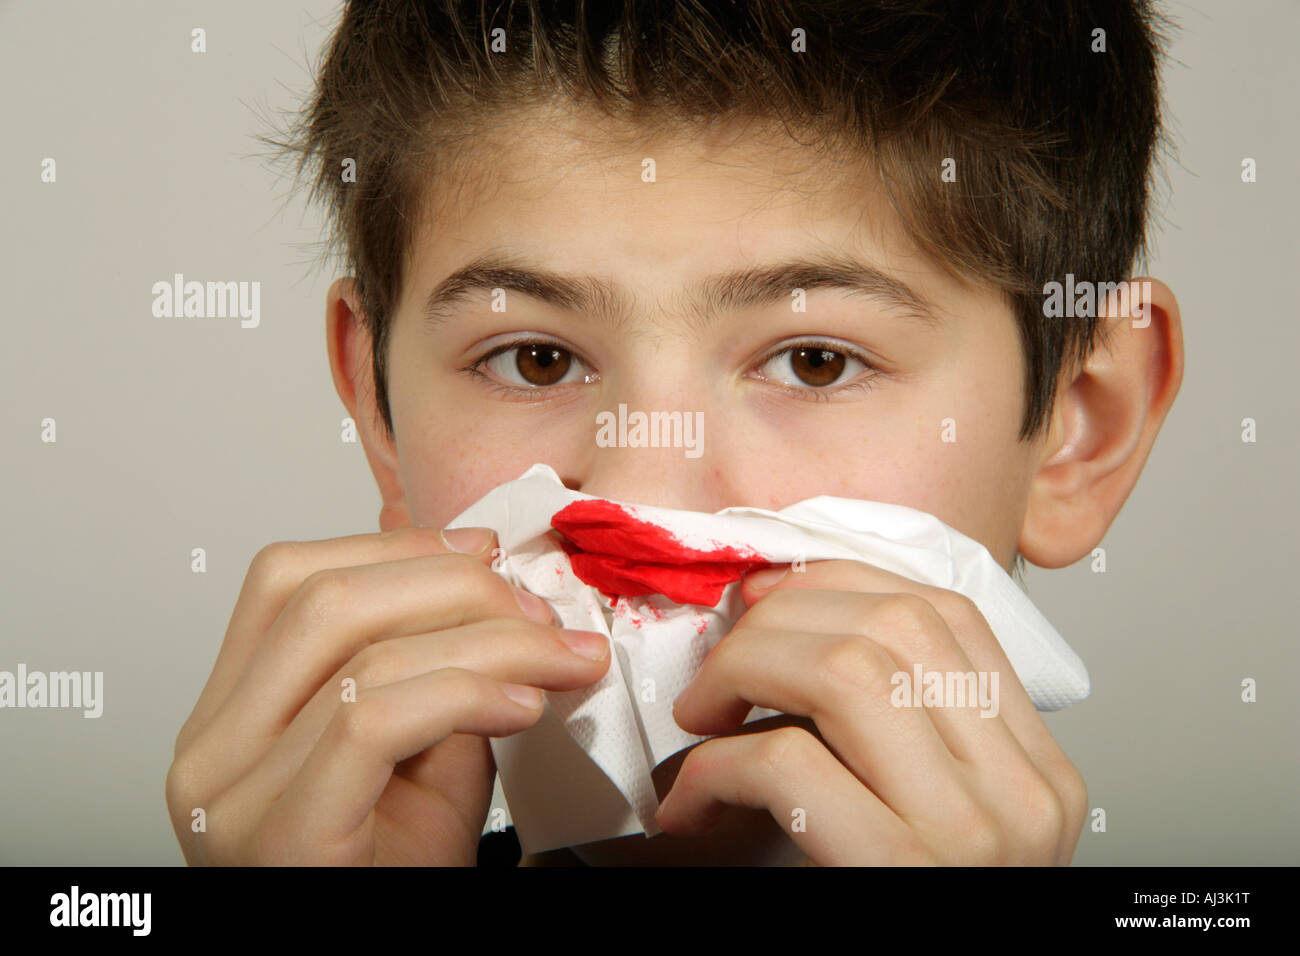 portrait of a young boy with a nosebleed Stock Photo